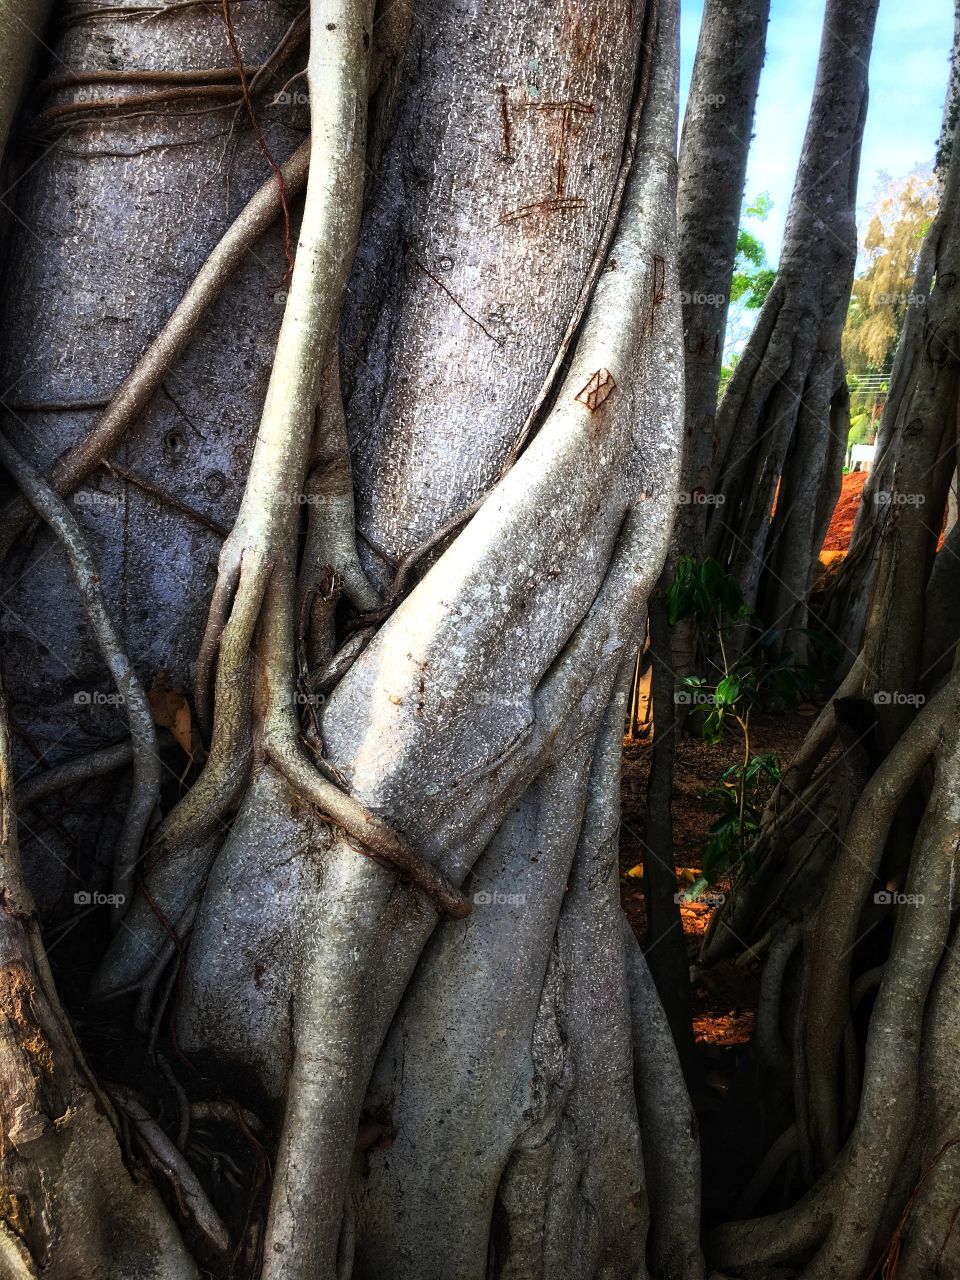 Roots of a large tree